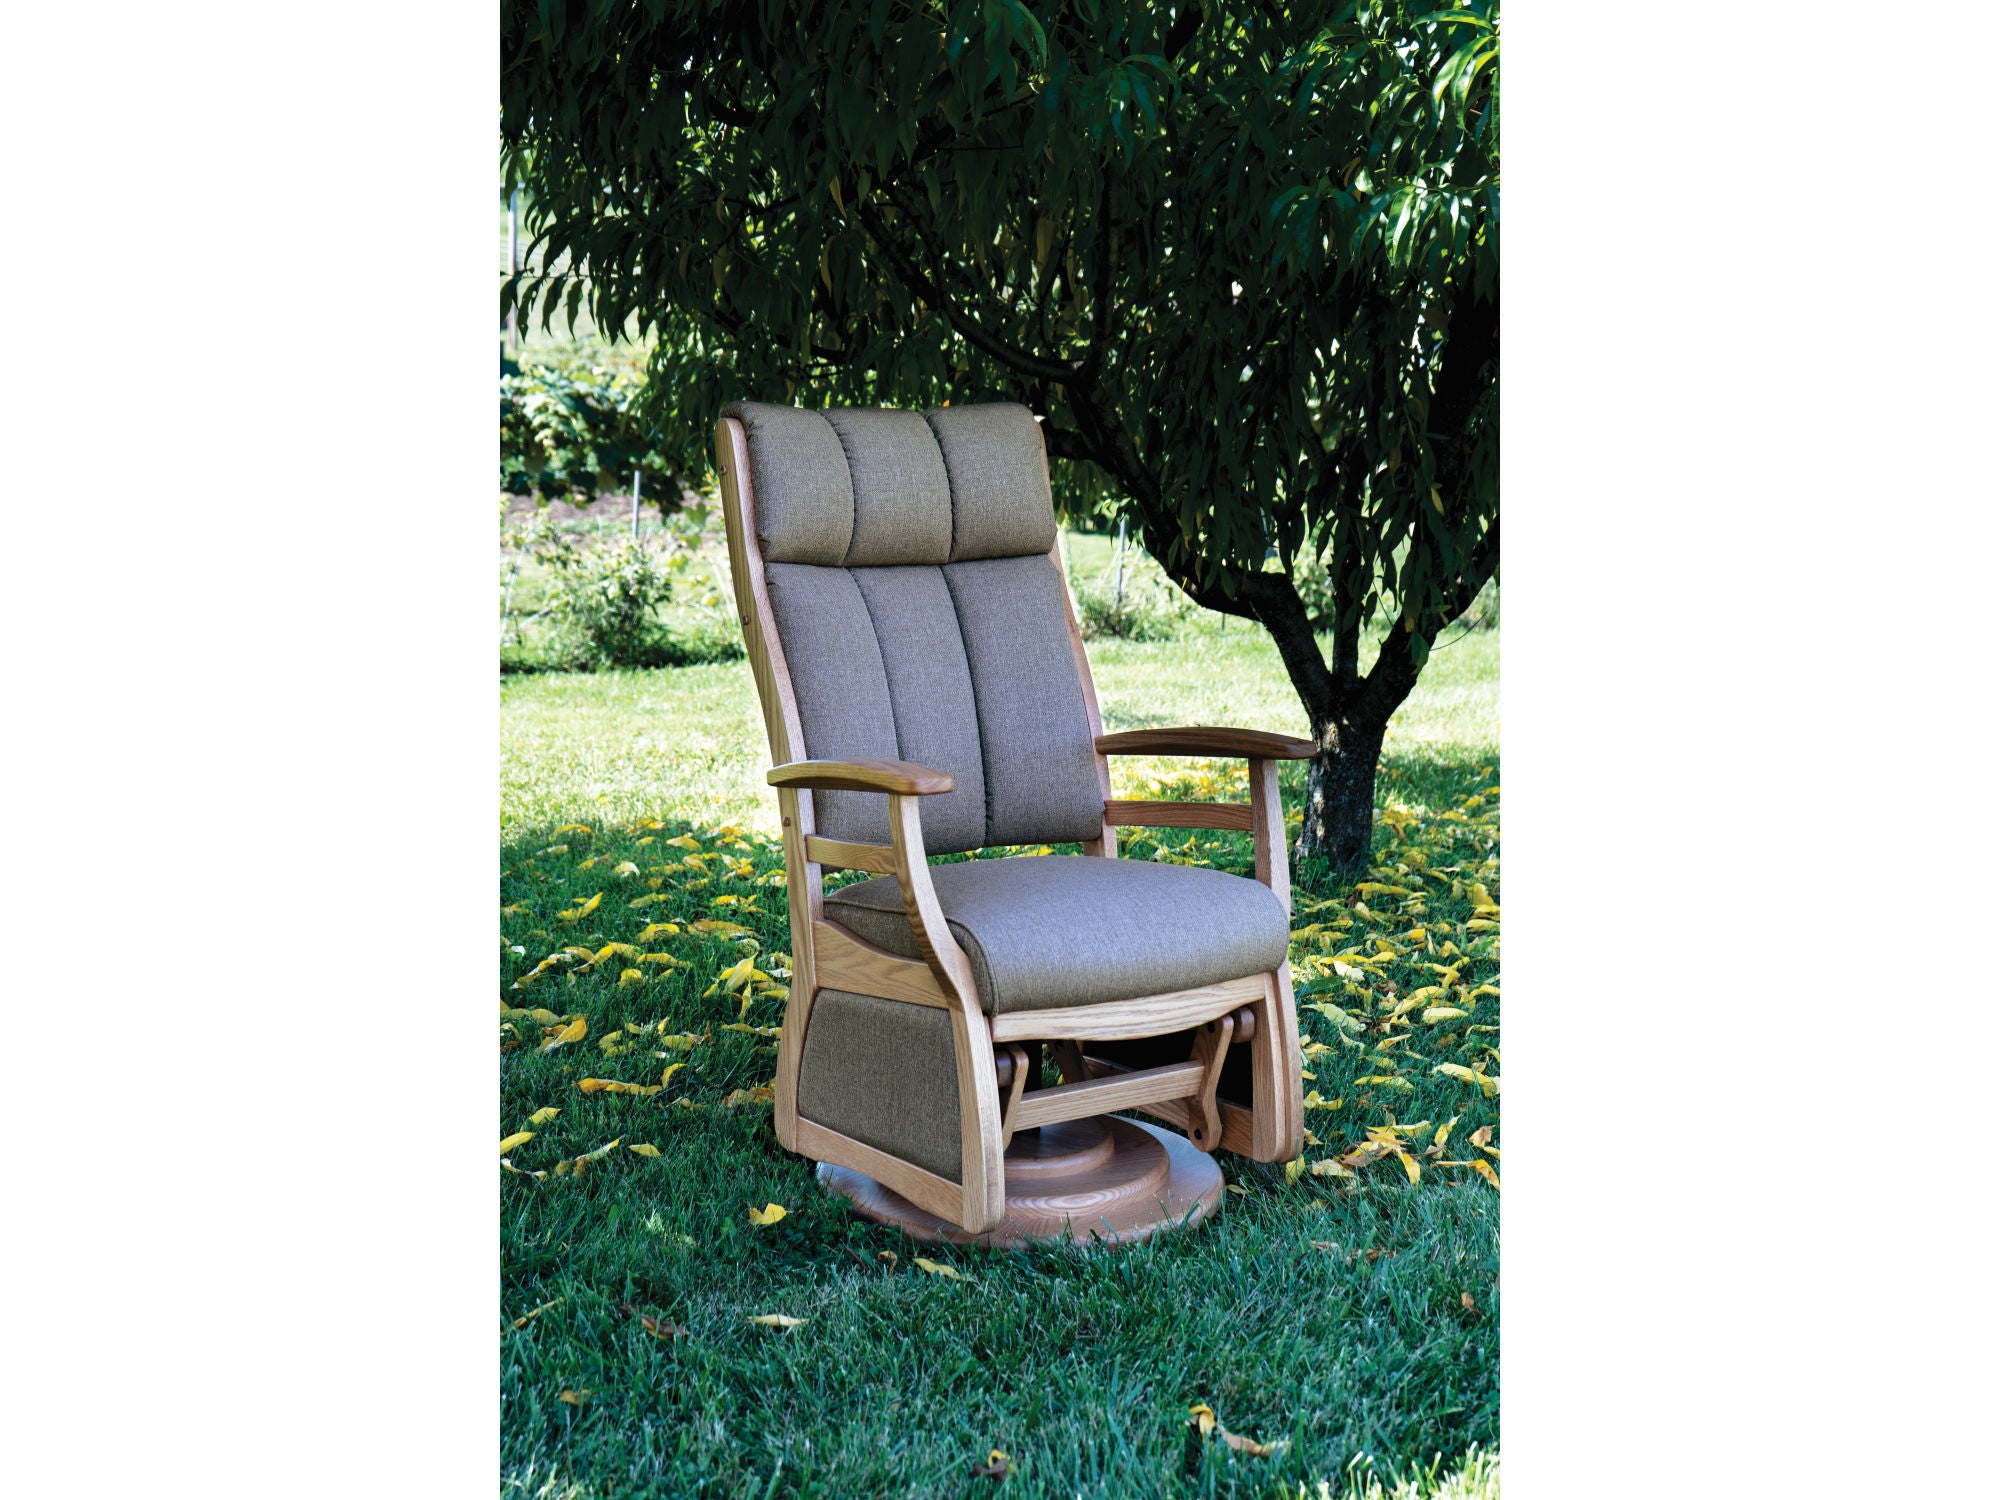 Amish Sierra 45" High Back Swivel Glider with Wood Arms